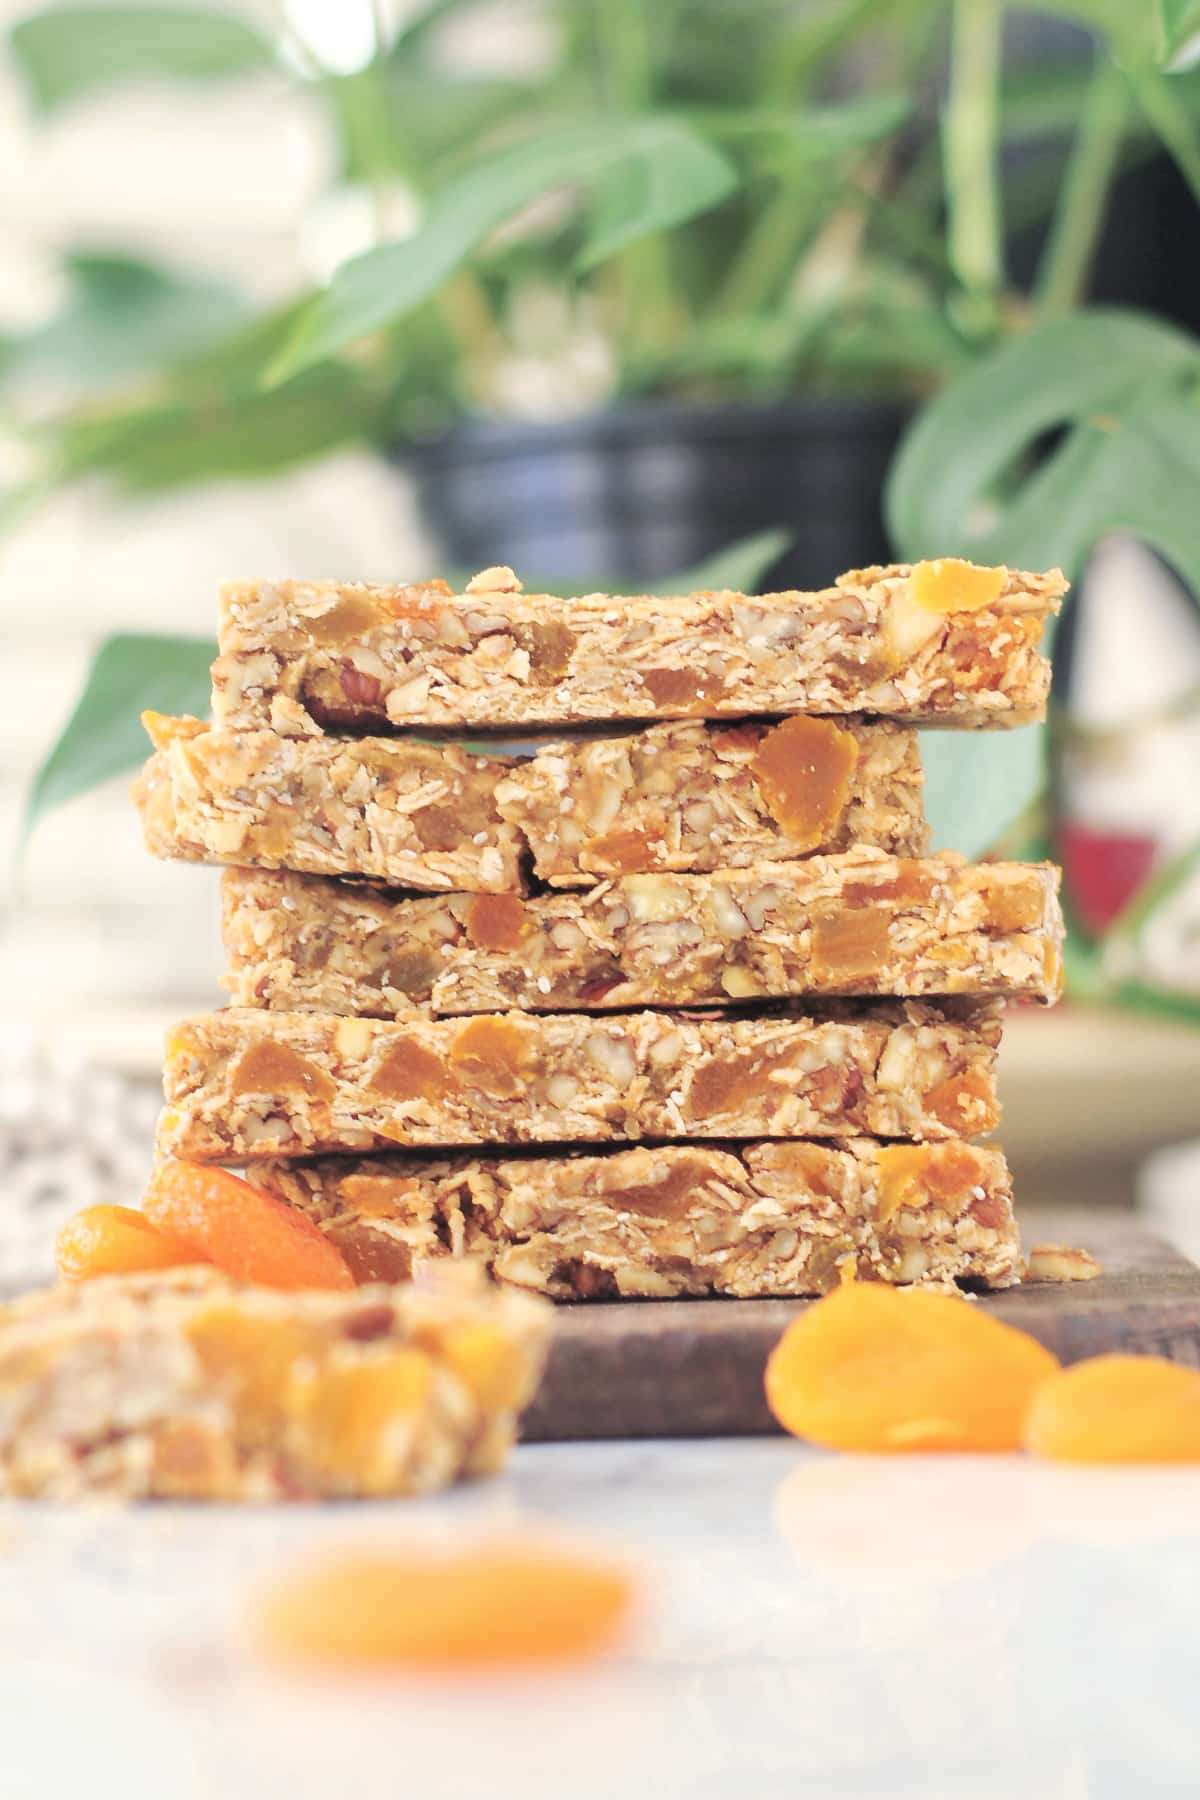 A stack of 5 granola bars sit on a wooden board. Another bar and a few dried apricots sit next to the board, and a large green plant is blurred in the background.